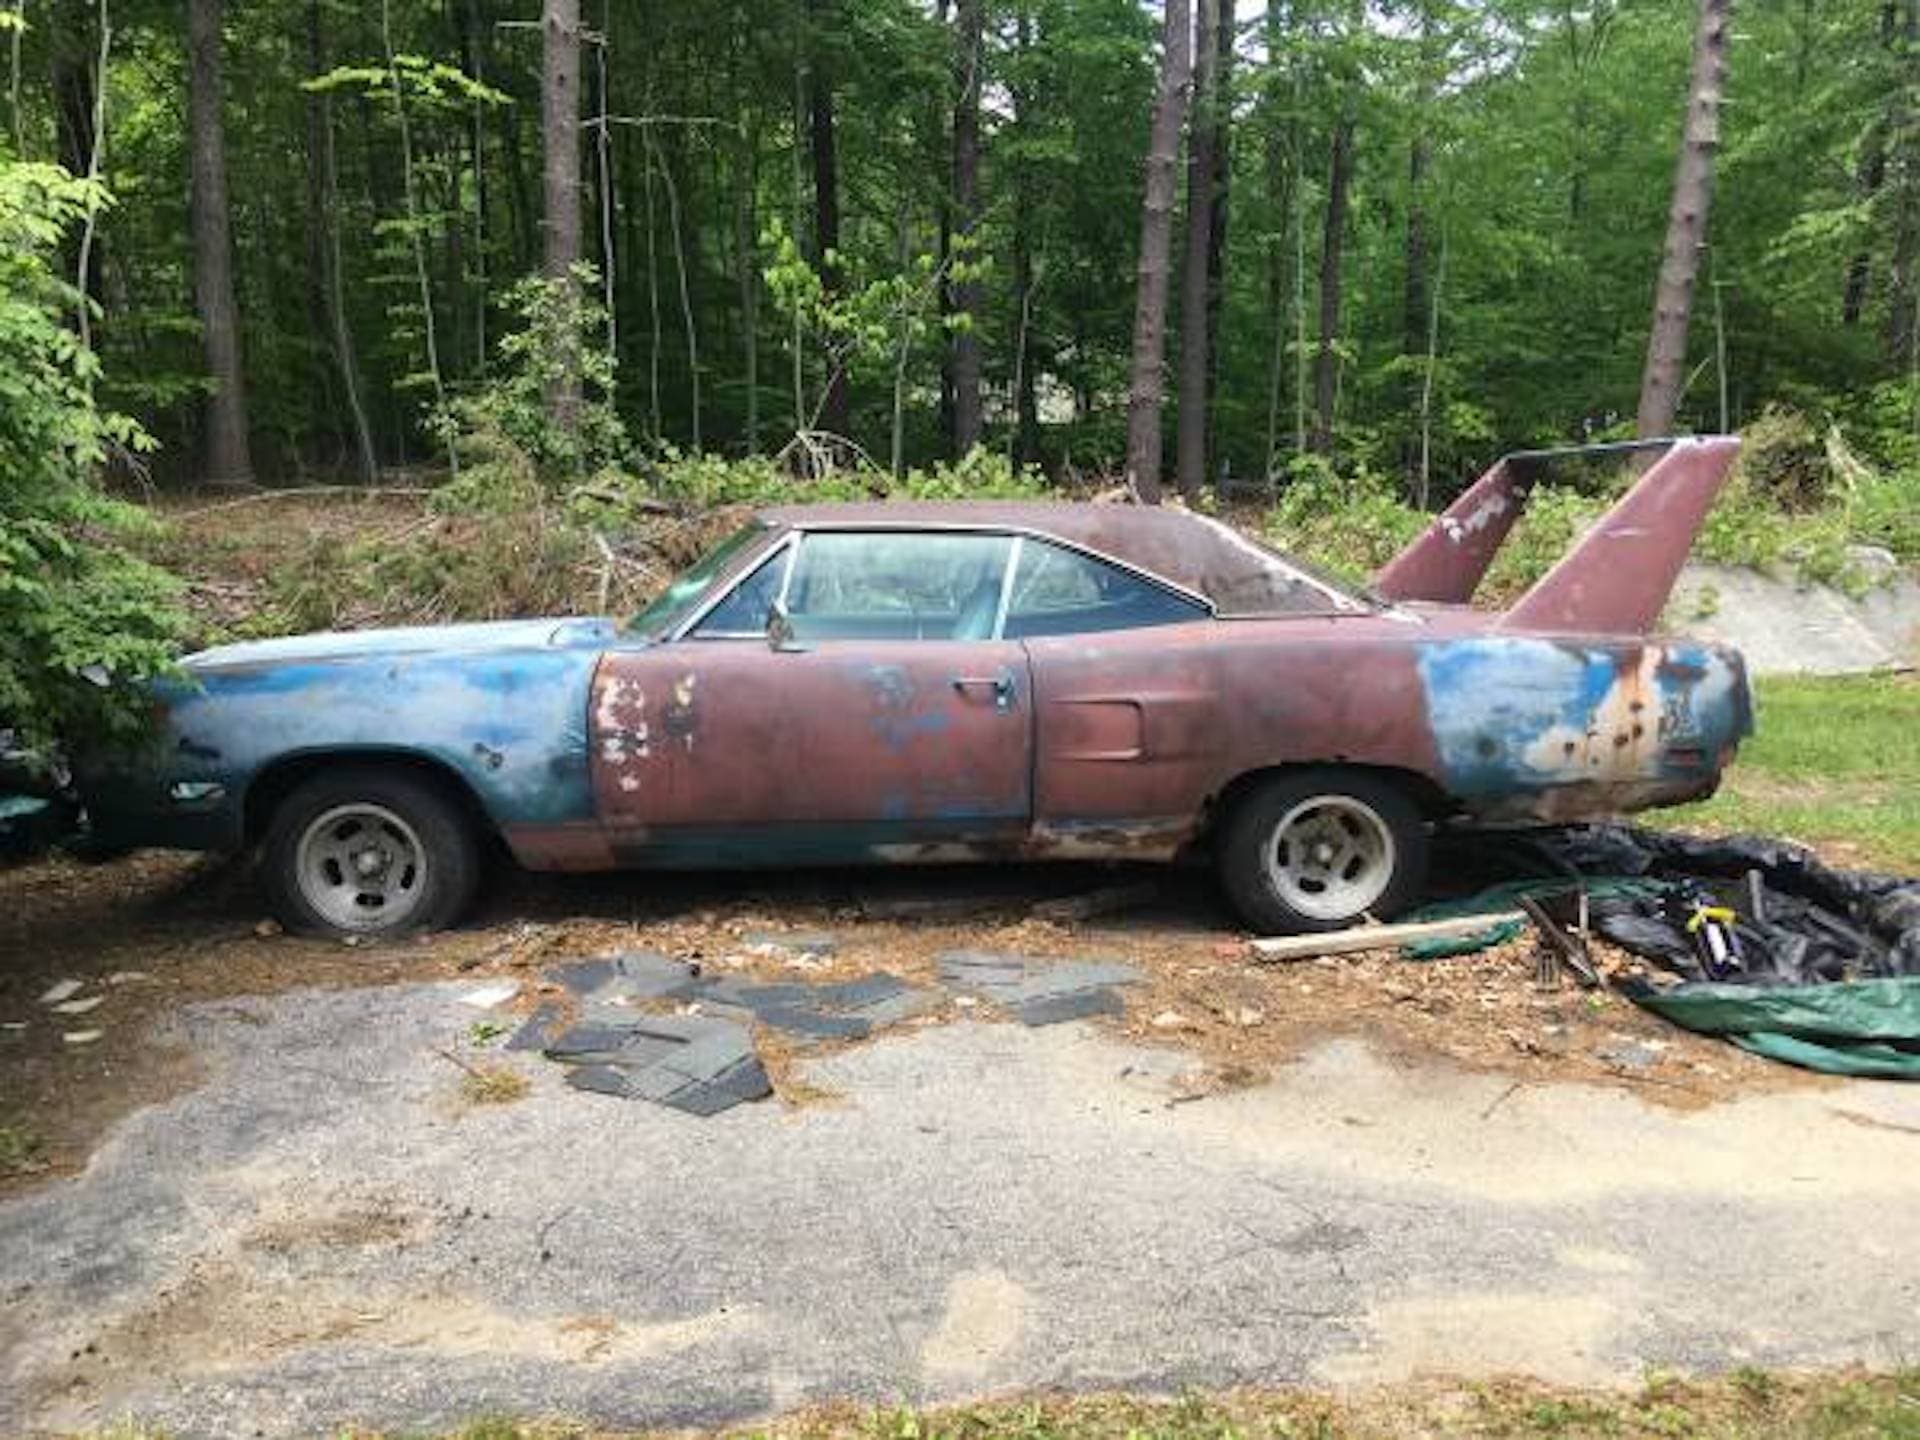 Rusty 1970 Plymouth Superbird Barn Find Is the Ultimate Muscle Car Restoration Project